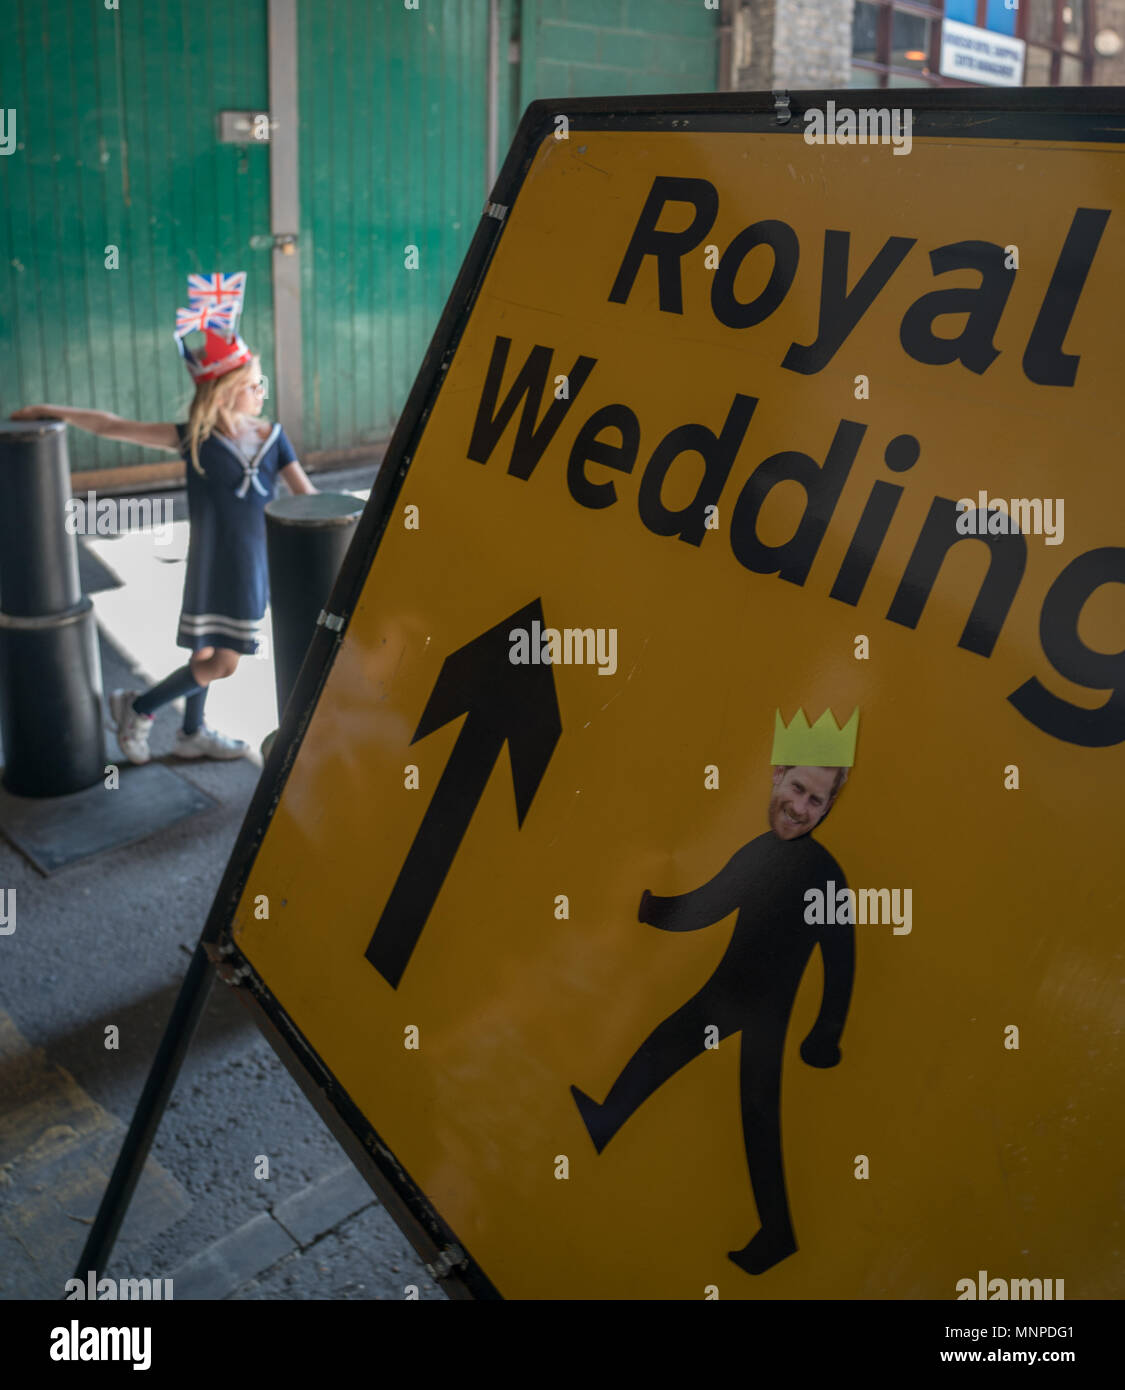 Windsor, UK, 19 May 2018. A young girl next to a road sign for the Royal Wedding of Harry and Meghan in Windsor, London, on which someone has placed a sticker with the head of Prince Harry. Photo date: Saturday, May 19, 2018. Photo: Roger Garfield/Alamy Stock Photo